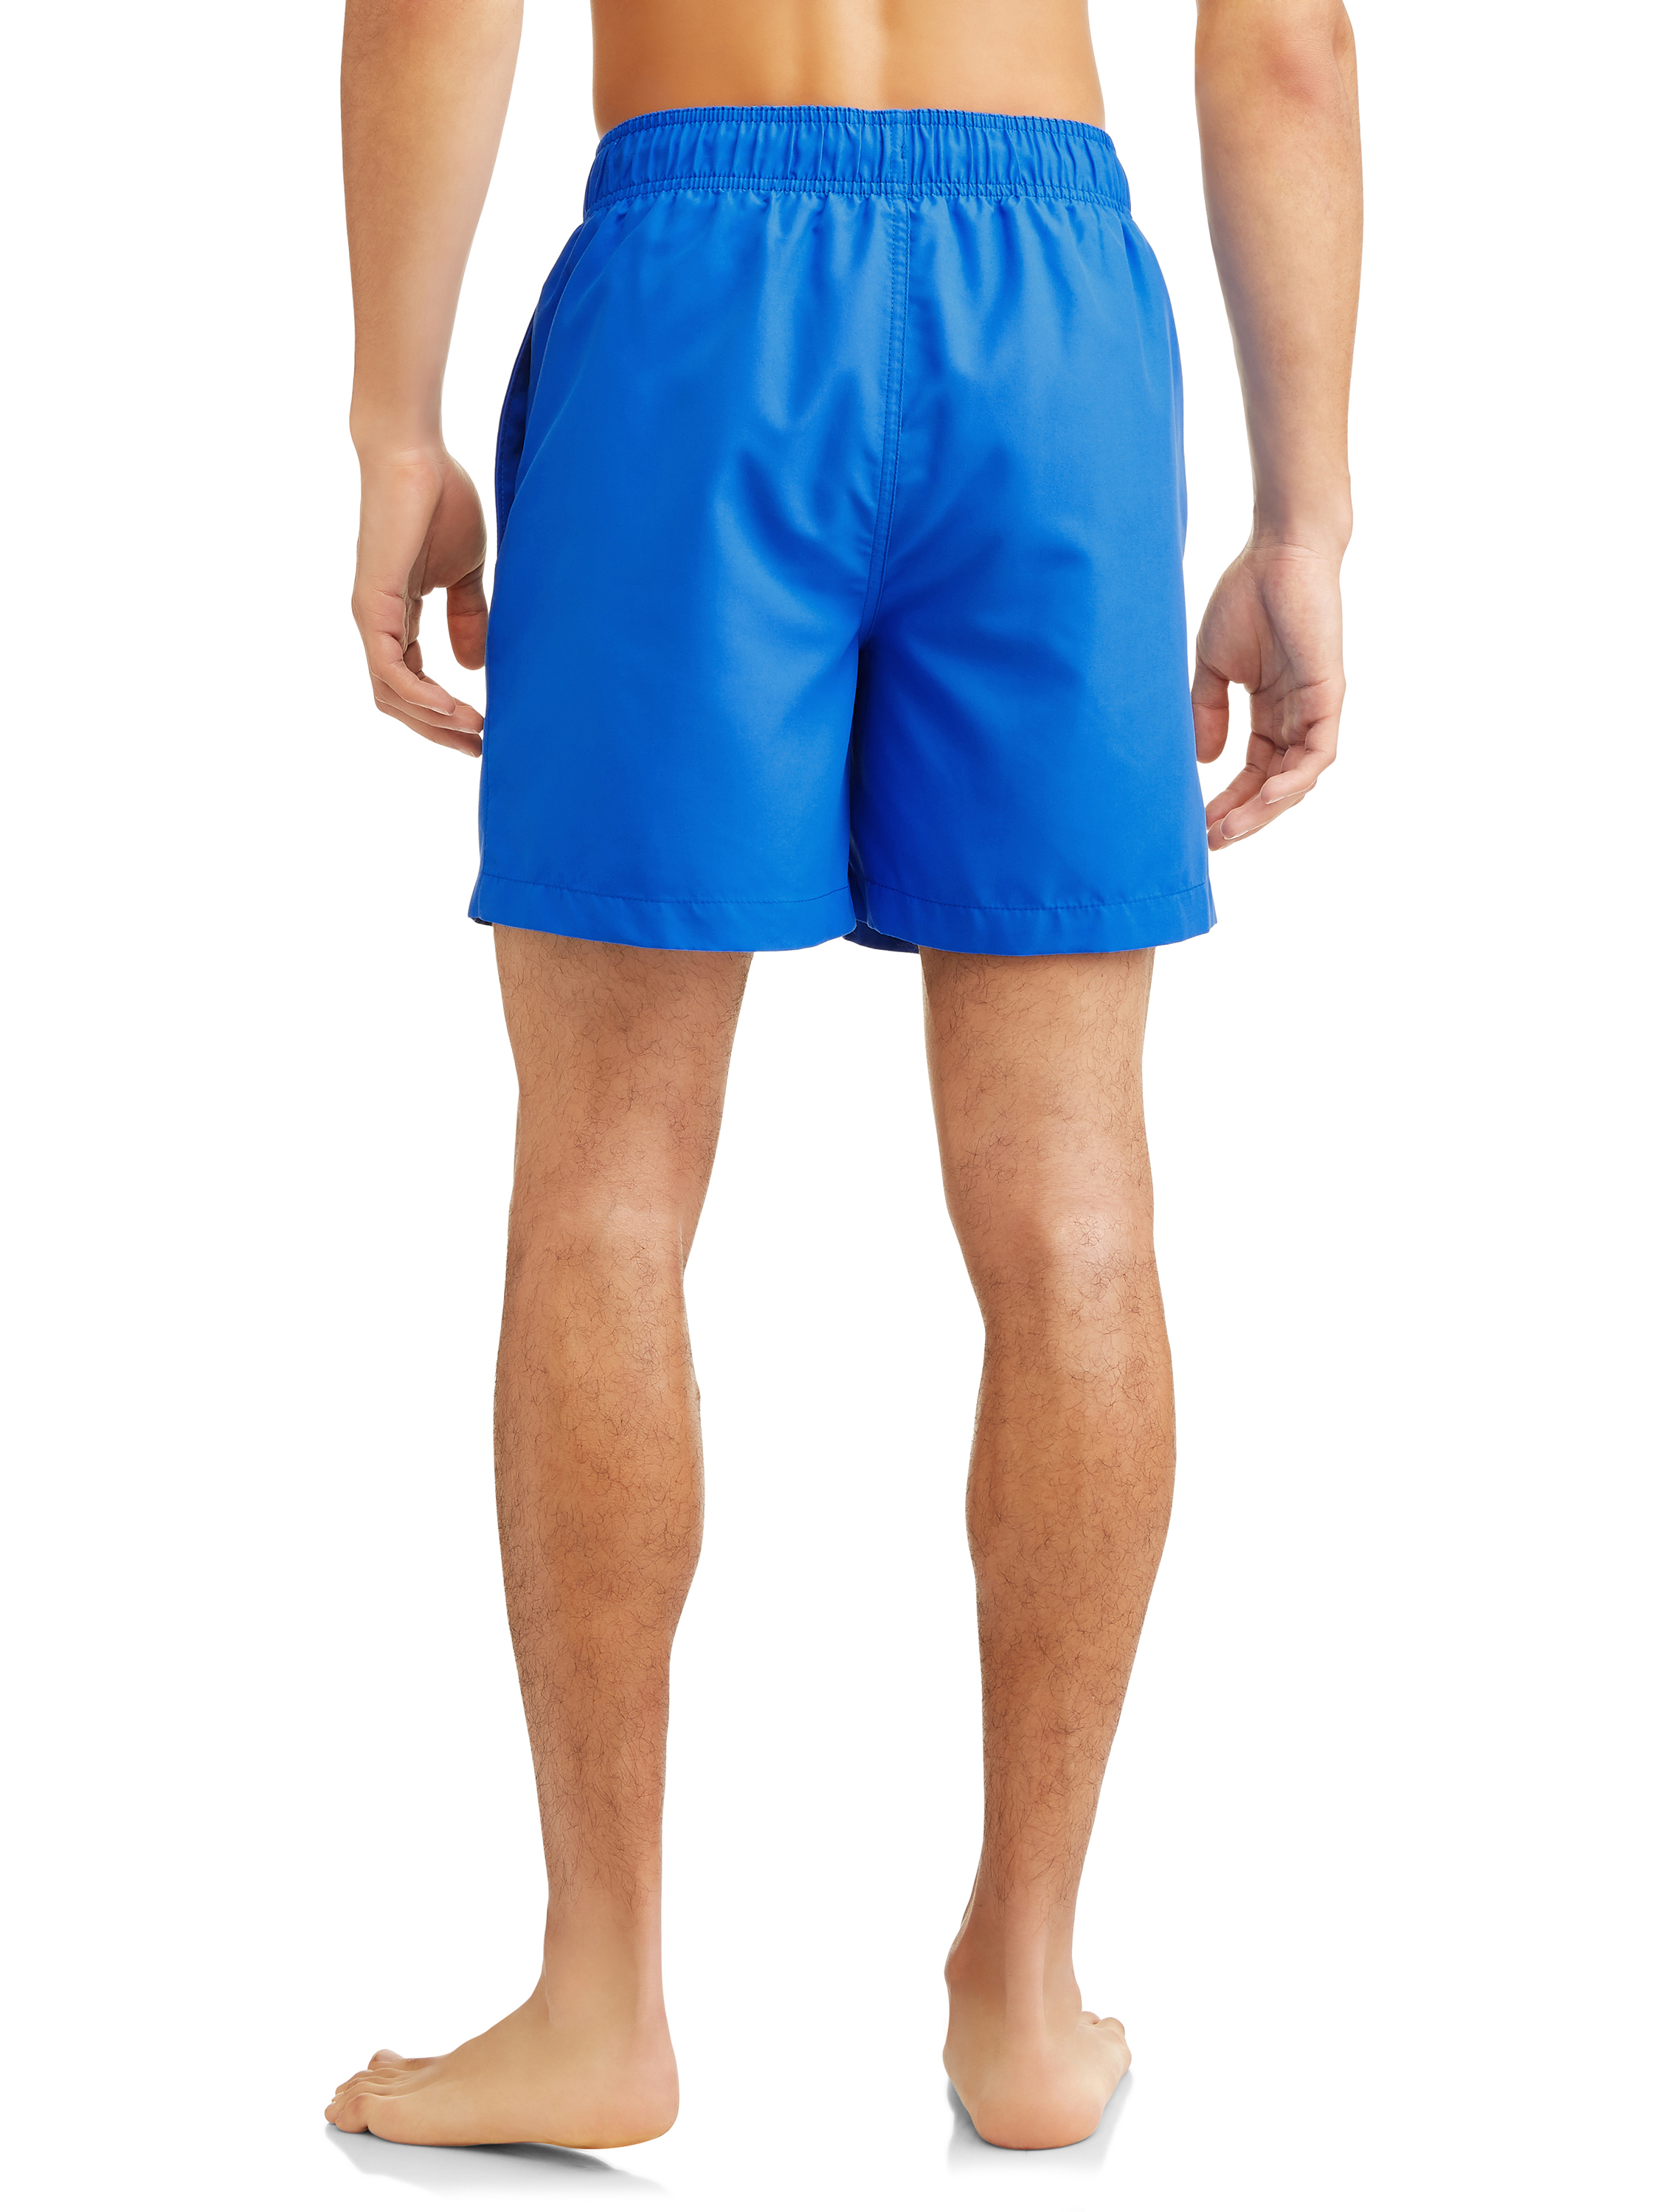 Men's And Men's Big Basic Swim Trunks, up to Size 5Xl - image 2 of 3